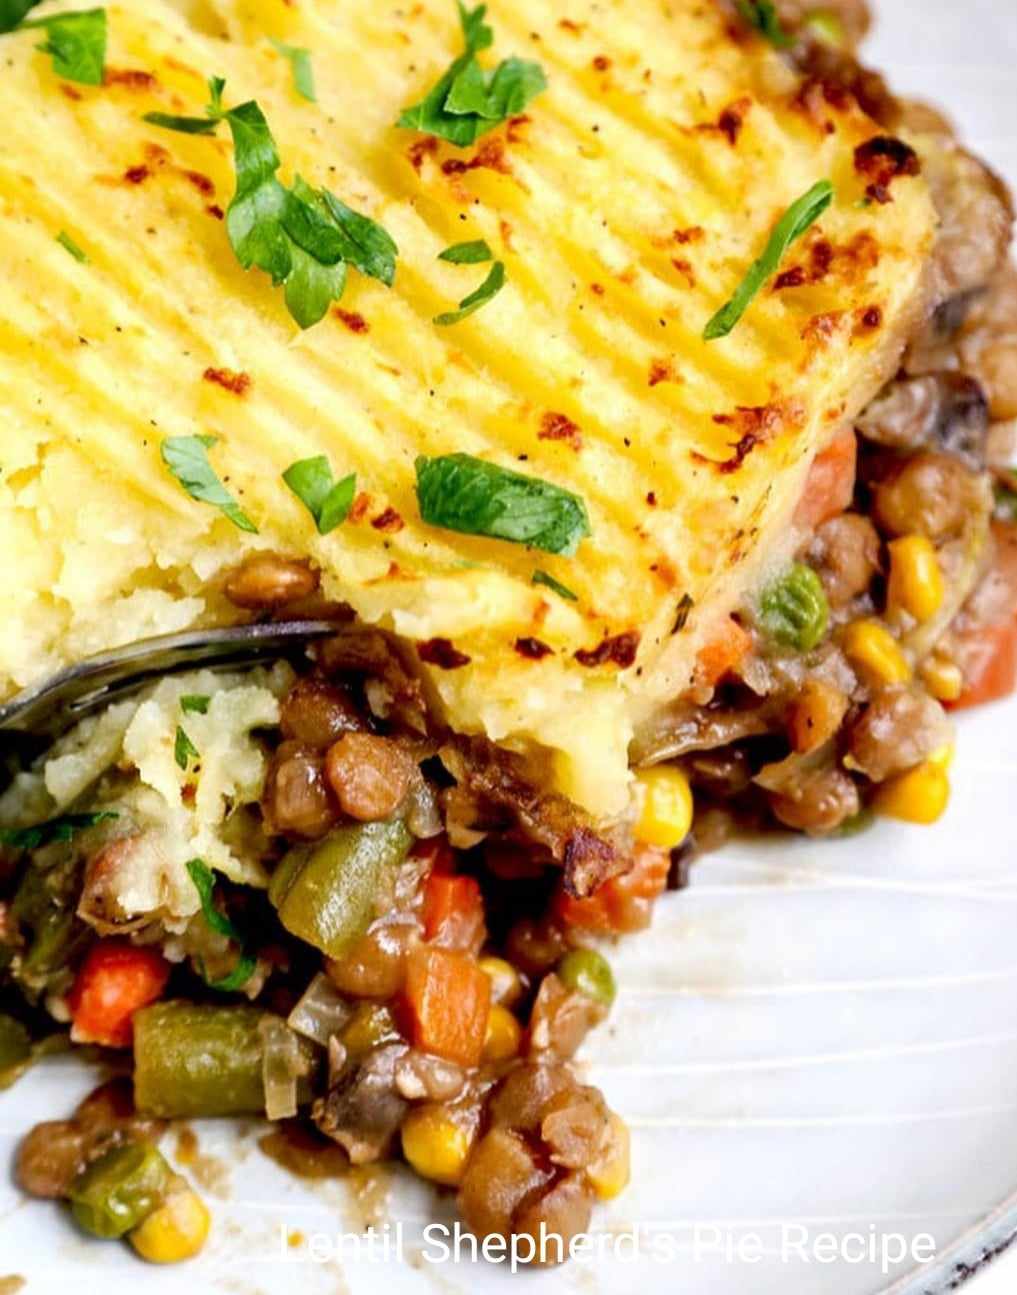 Lentil Shepherd's Pie Recipe: A Hearty and Wholesome Vegan Delight This lentil shepherd's pie is a delectable twist on the classic, replacing traditional lamb with protein-packed lentils. It's a comforting and satisfying dish topped with creamy potatoes, perfect for those seeking a wholesome, plant-based option.